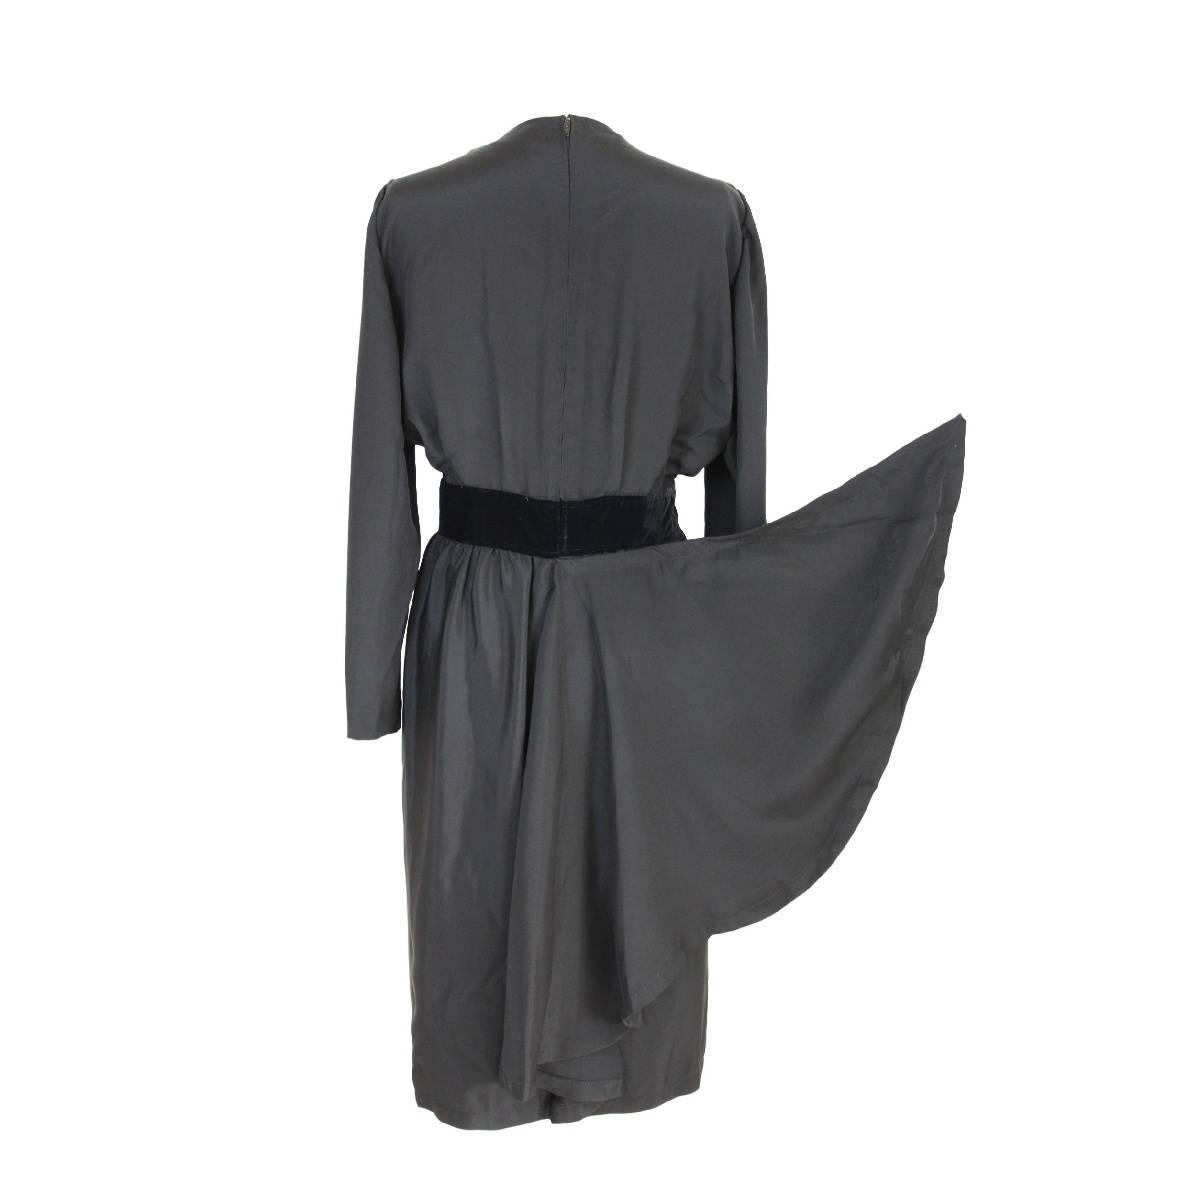 Mario Borsato vintage evening black dress women’s. In 100% silk, v-neck. Applications on waist in velvet. Plissè on the back. Made in italy, new with tag.

Size 44 It 10 Us 12 Uk

Shoulders: 44 cm
Chest / Bust: 51 cm
Sleeves: 59 cm
Length: 108